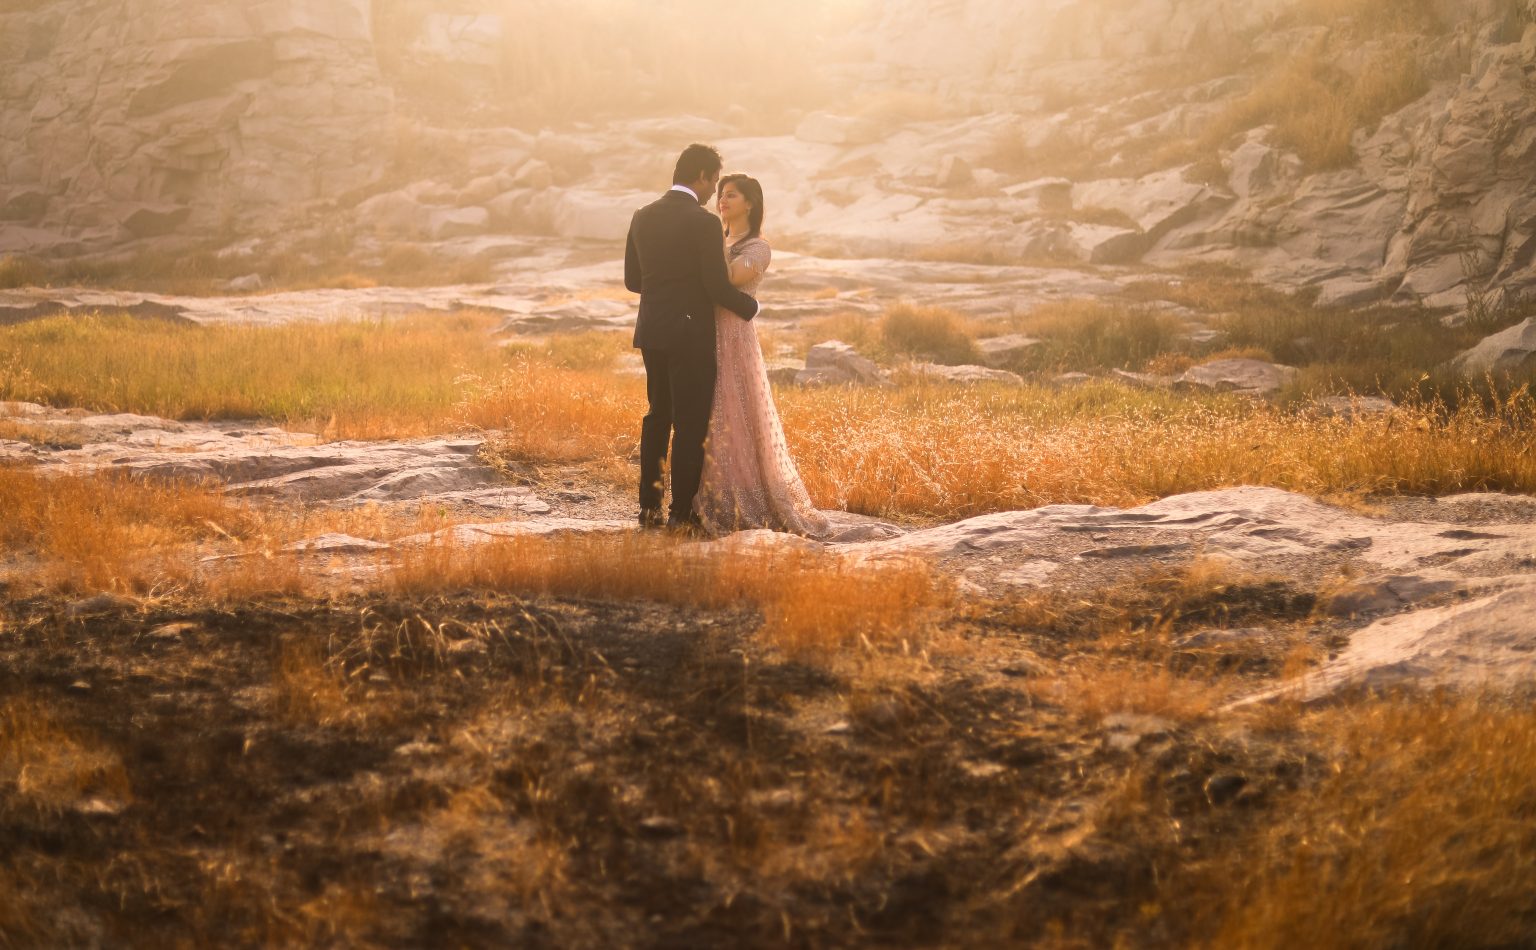 Best Places for pre-wedding photoshoot in Hyderabad for free